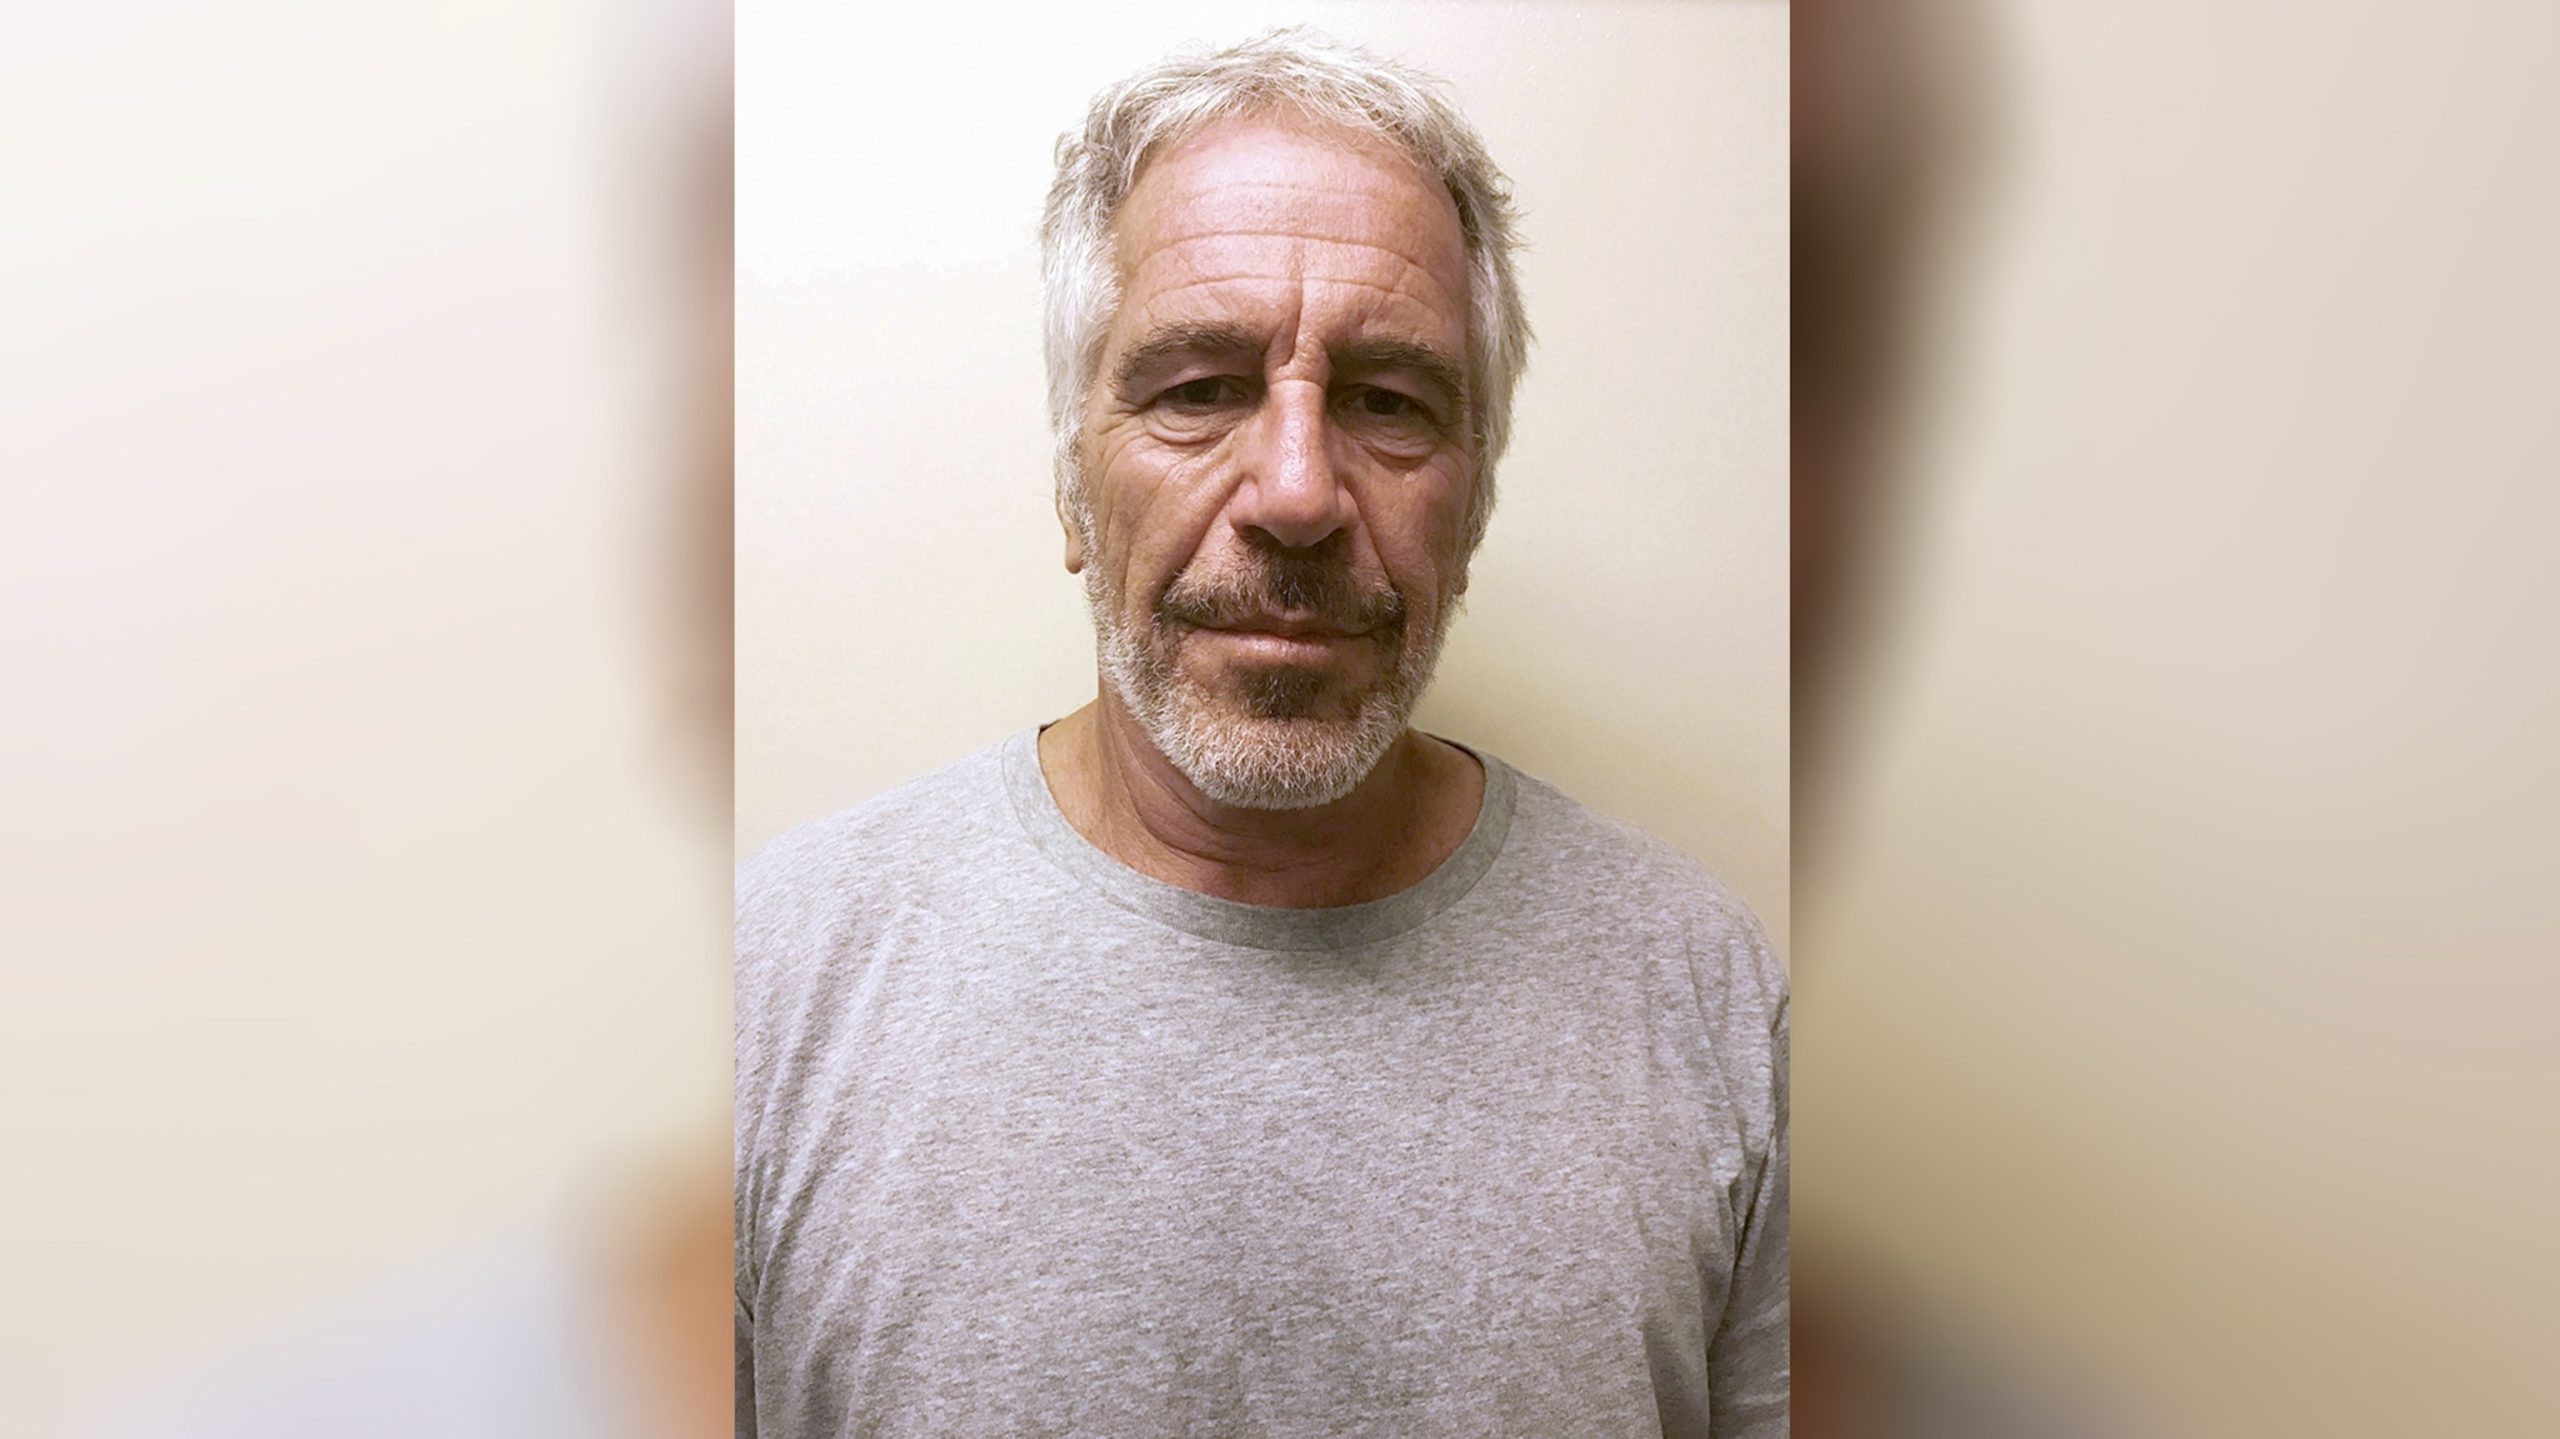 JPMorgan Agrees to Allocate $75 Million to Victims' Fund in Jeffrey Epstein Settlement